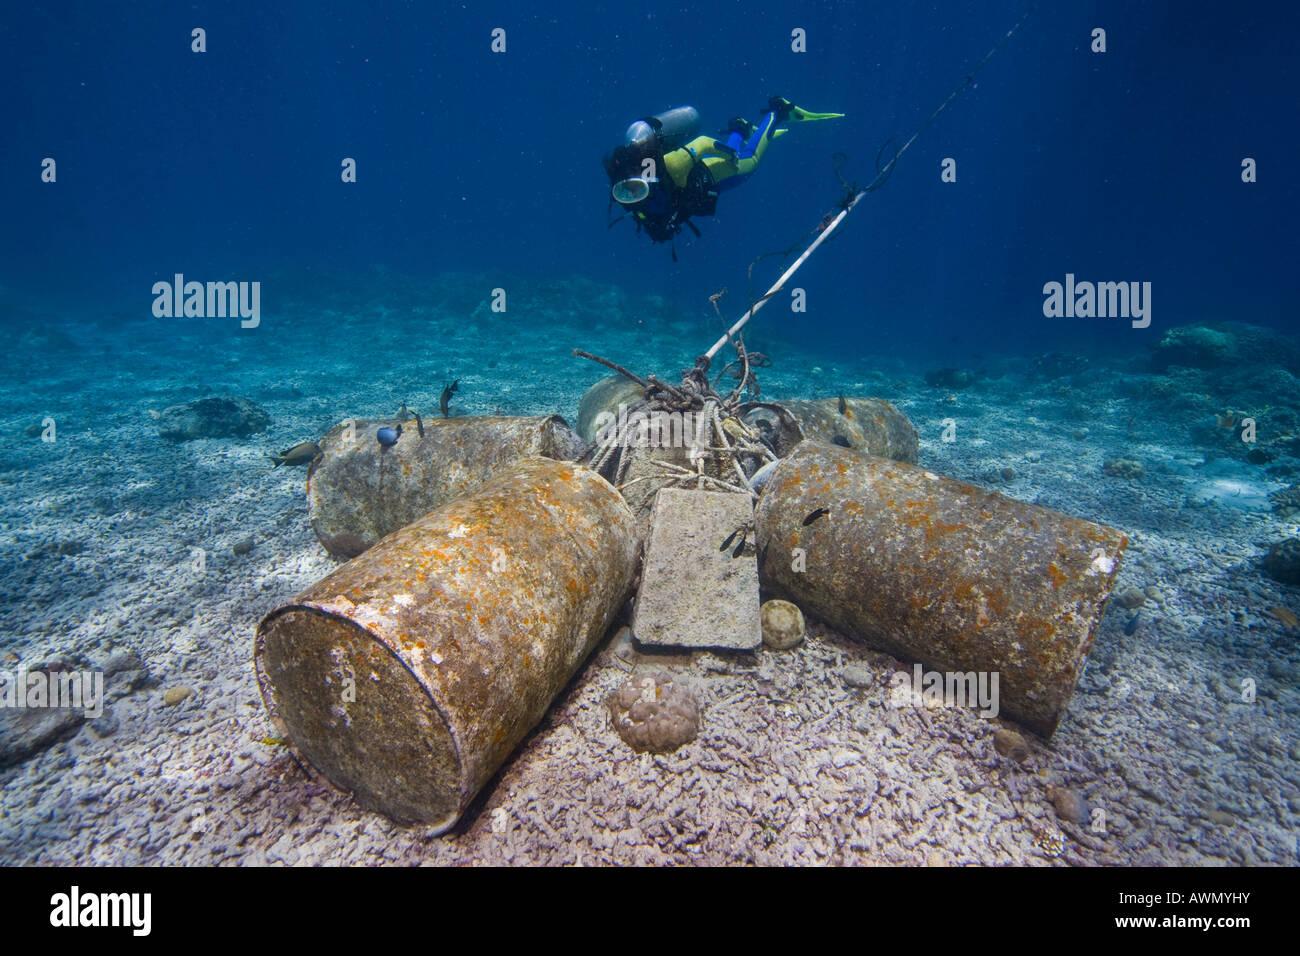 Barrels used to anchor a buoy on the ocean floor, Bunaken, Indonesia, Southeast Asia, Asia Stock Photo